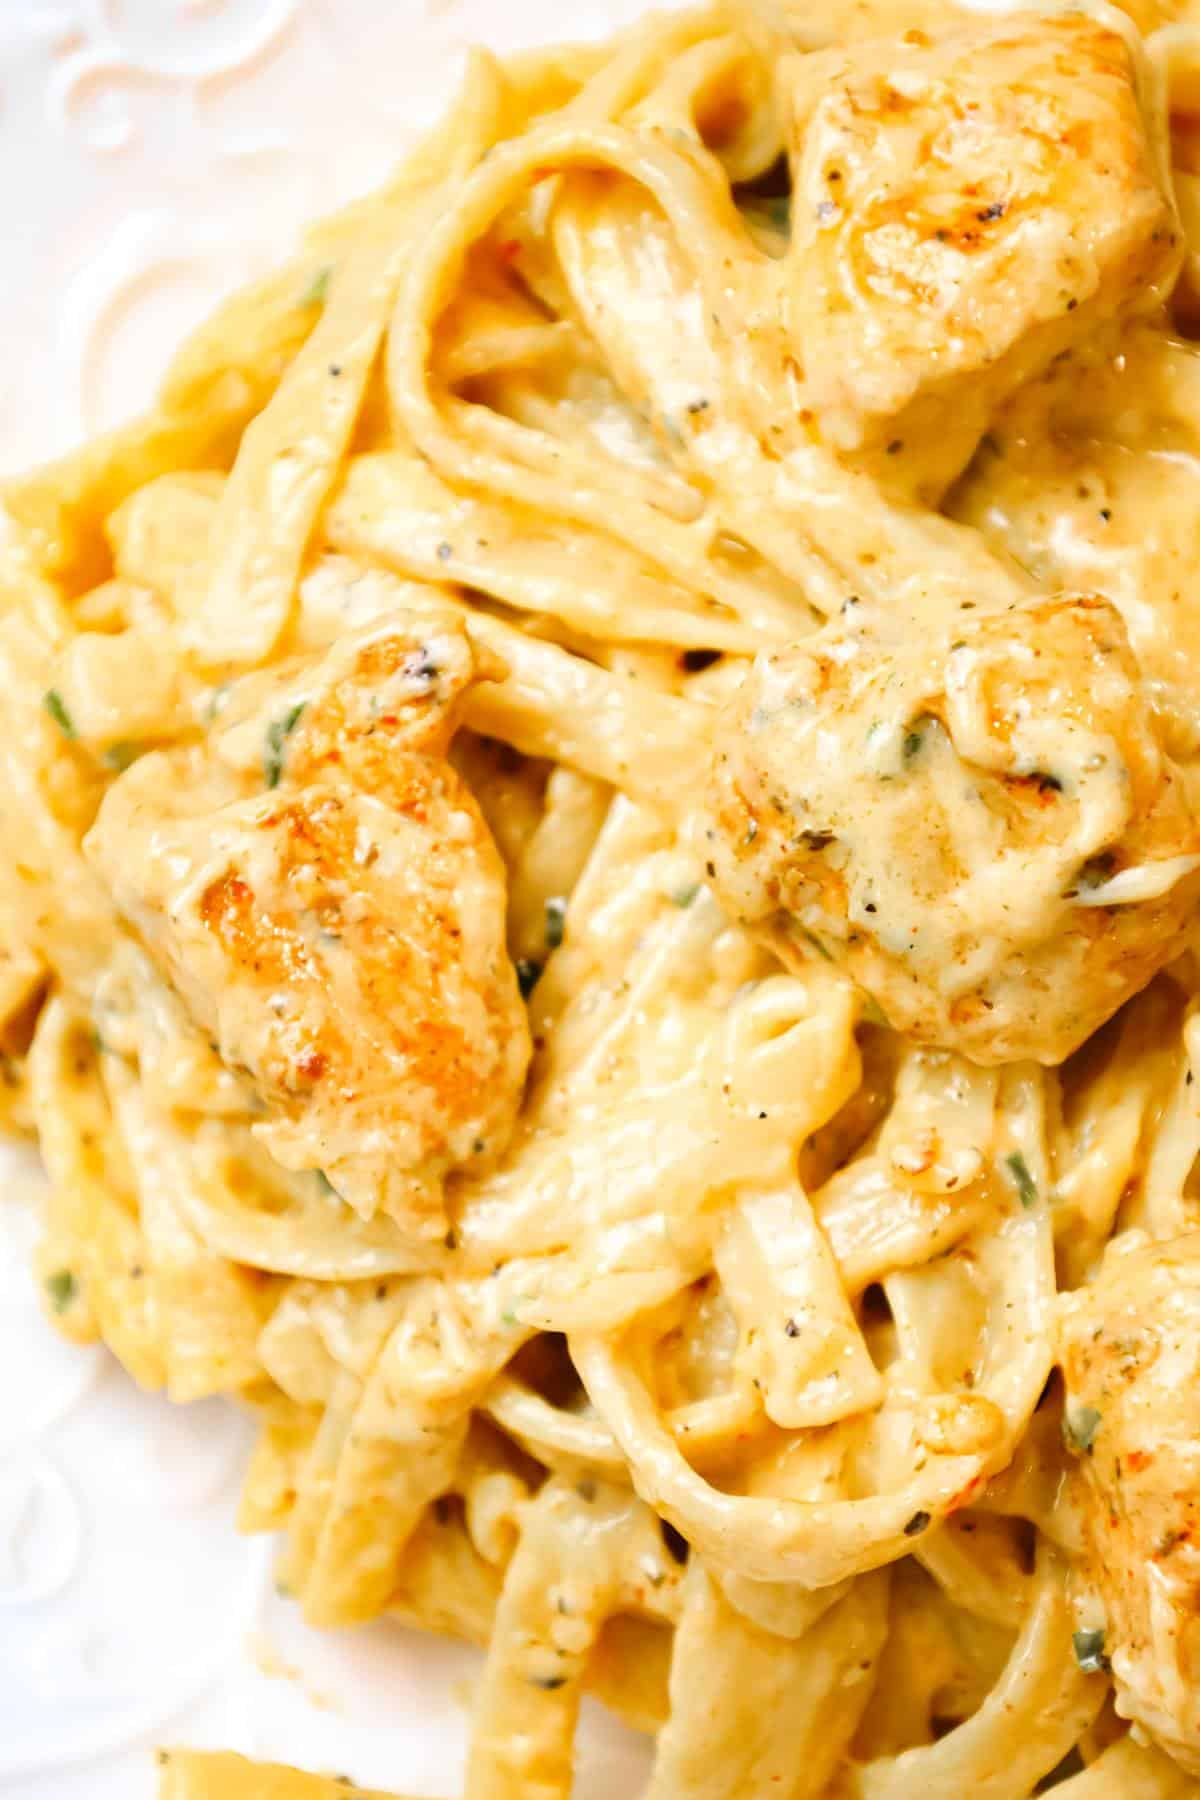 Cajun Chicken Alfredo is a creamy pasta recipe loaded with chunks of chicken breast, Cajun seasoning and parmesan cheese.